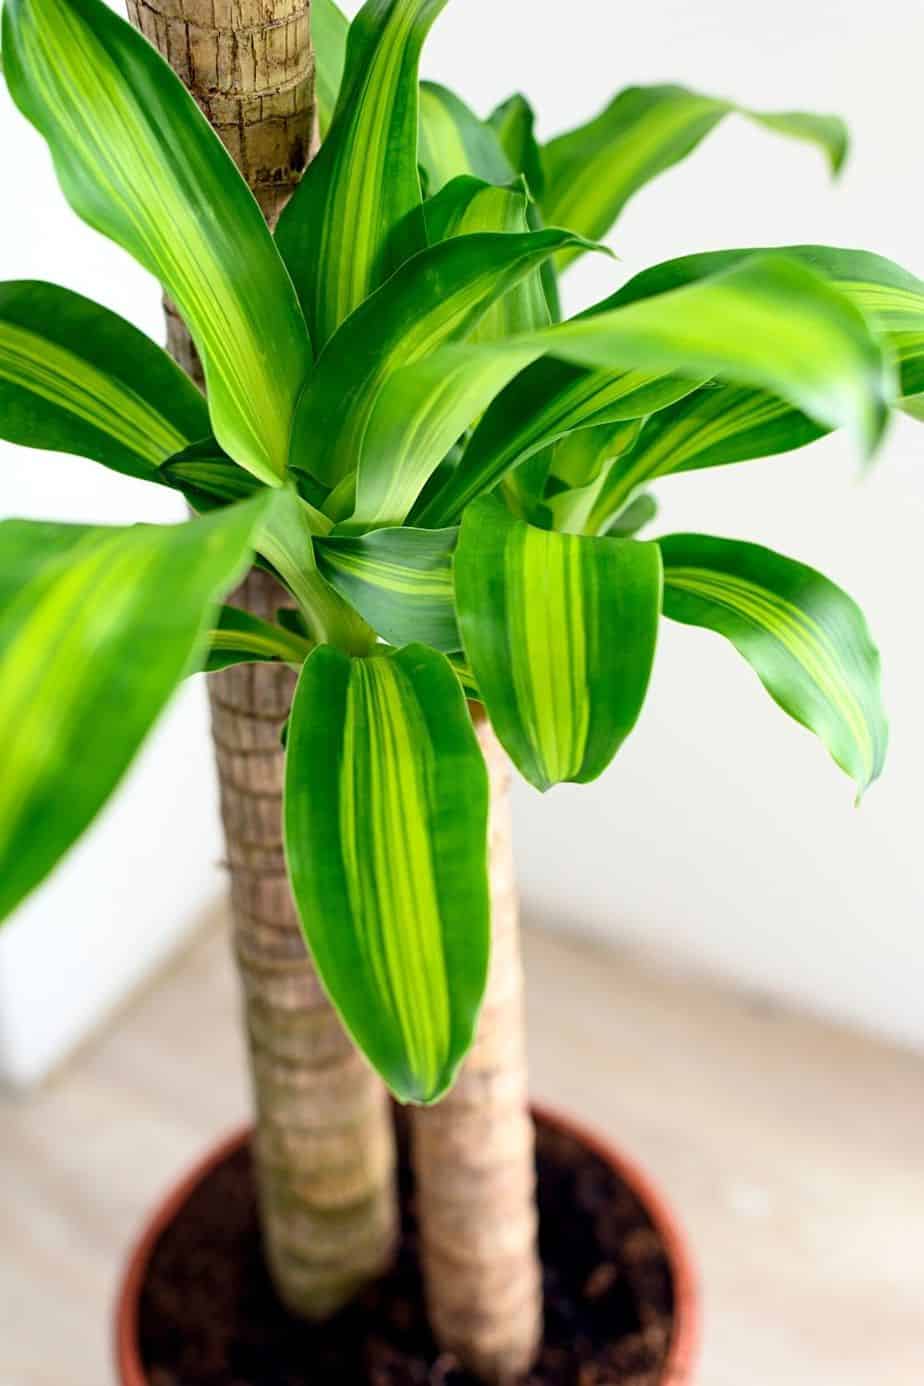 Dracaena contains saponin, a compound that is toxic for cats